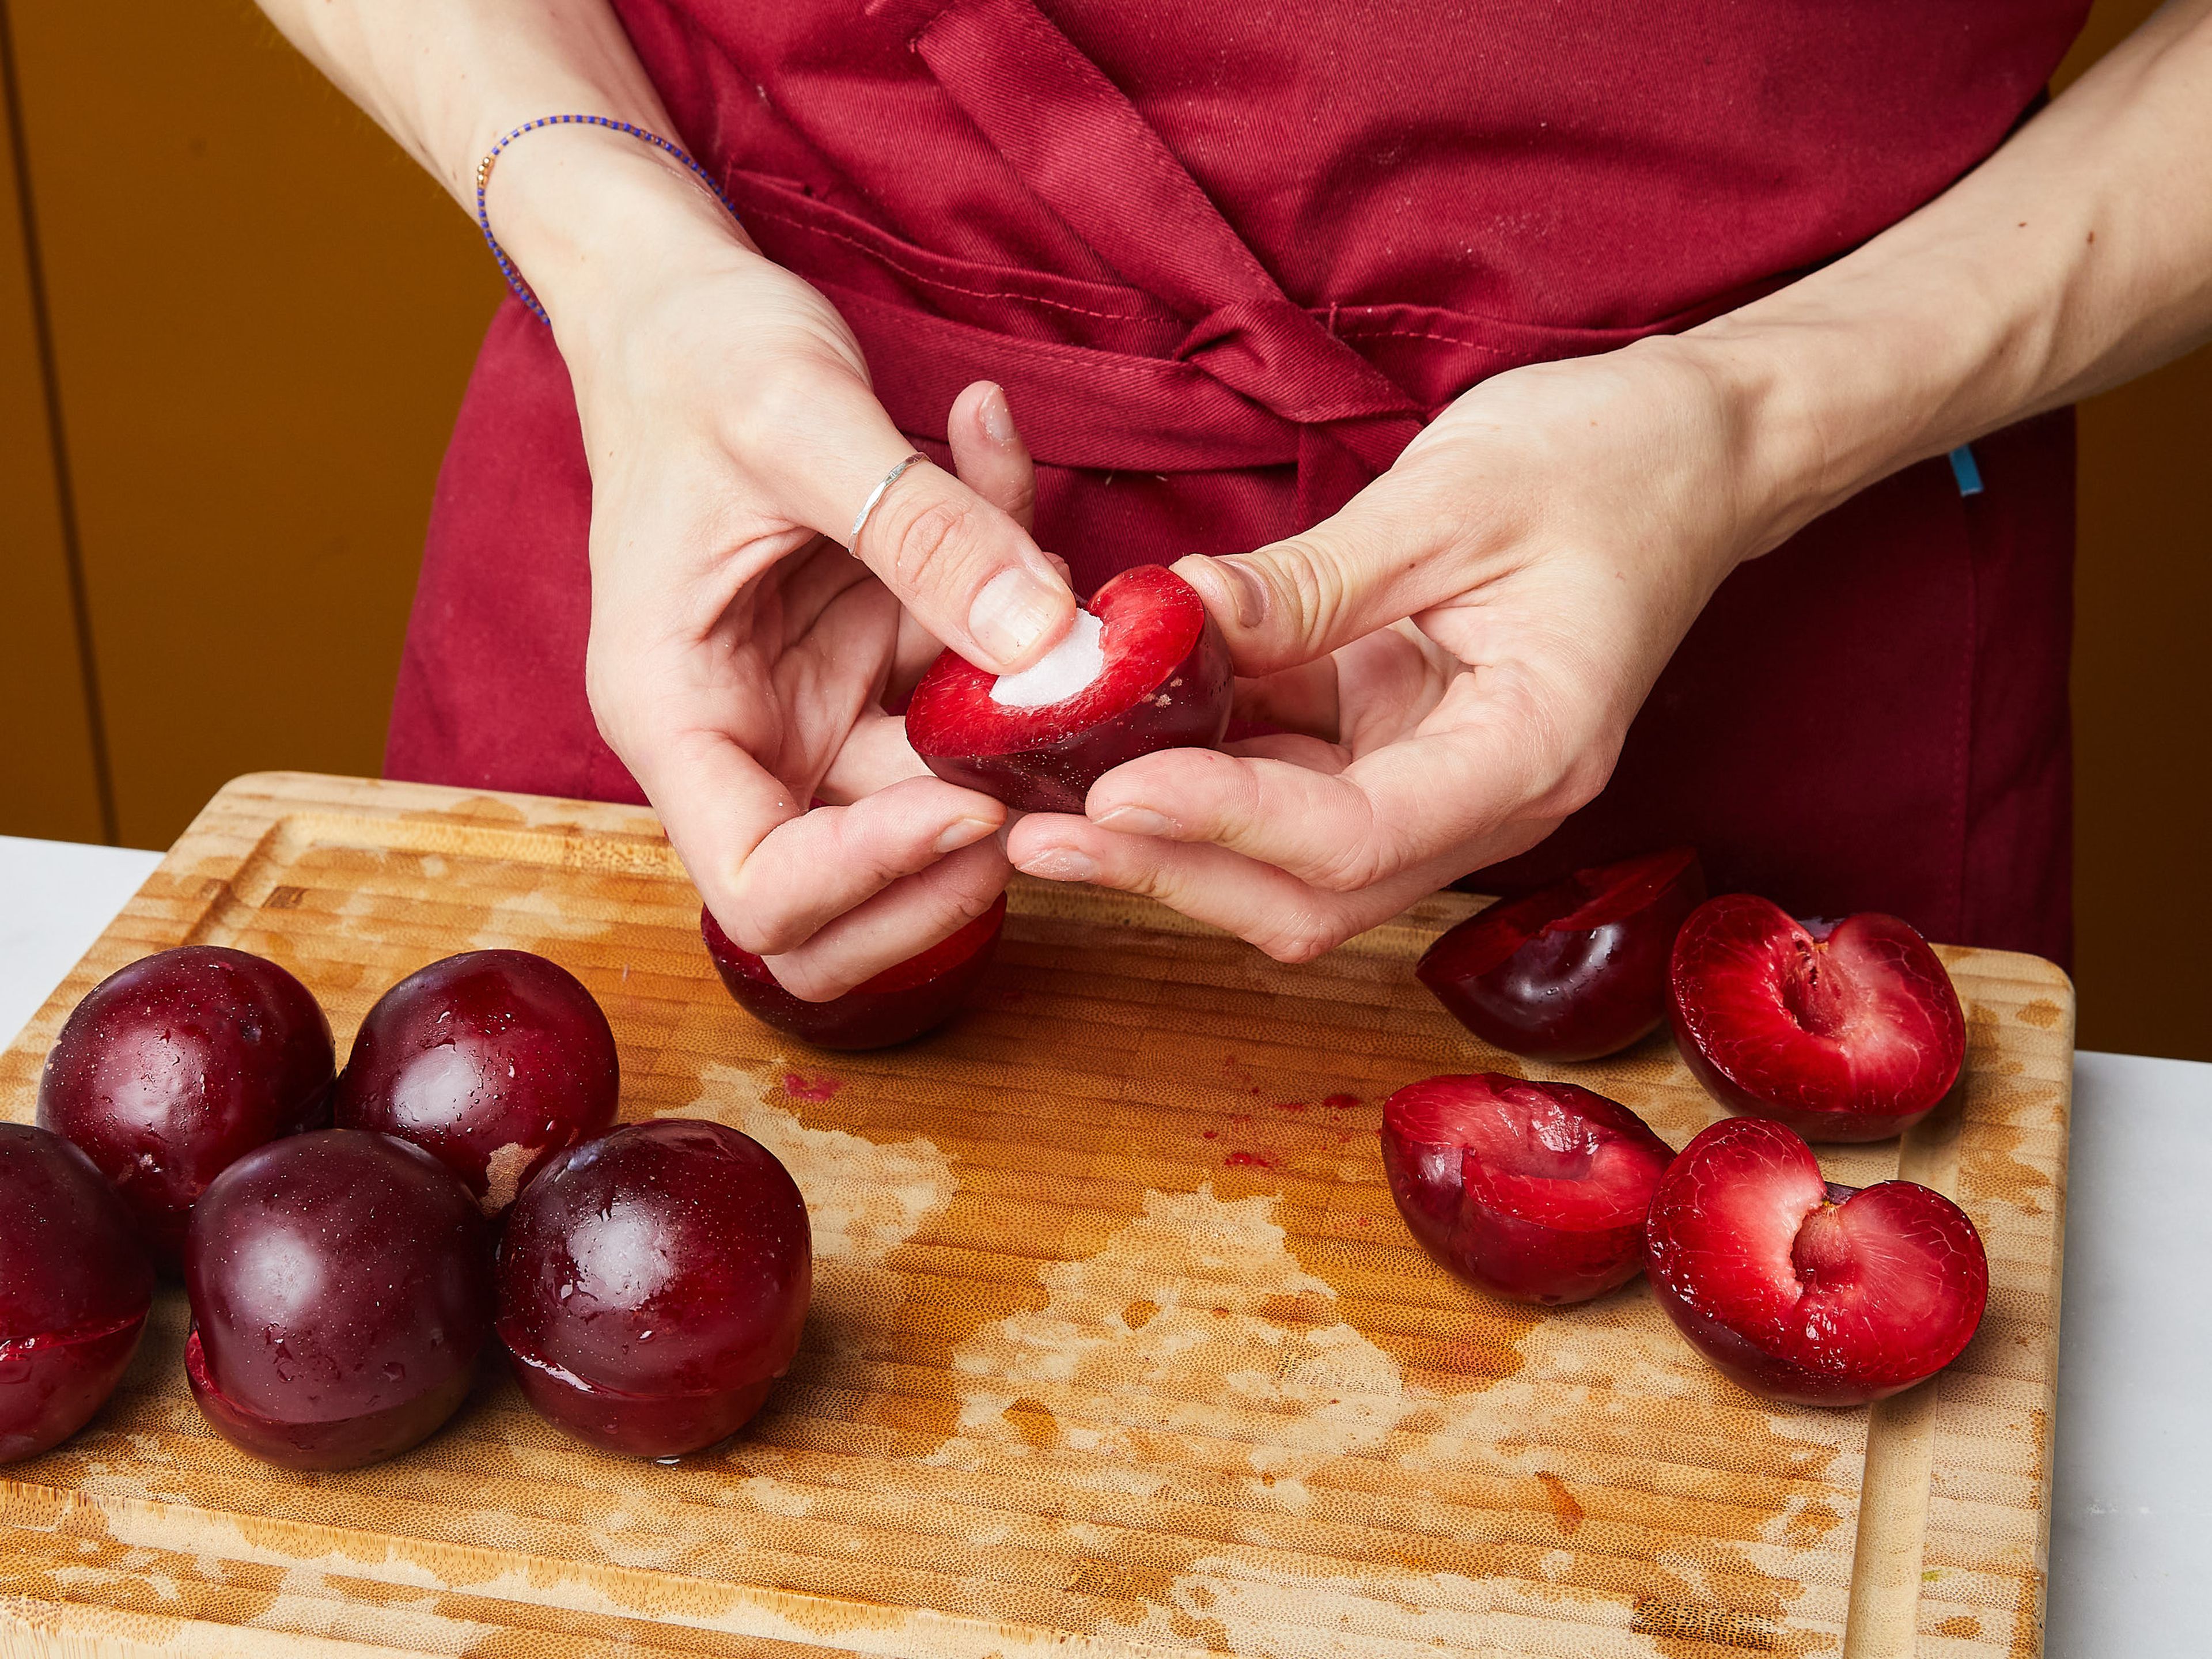 In the meantime, cut the plums in half, and remove the pit. Then press a piece of sugar cube into each plum and close it again.